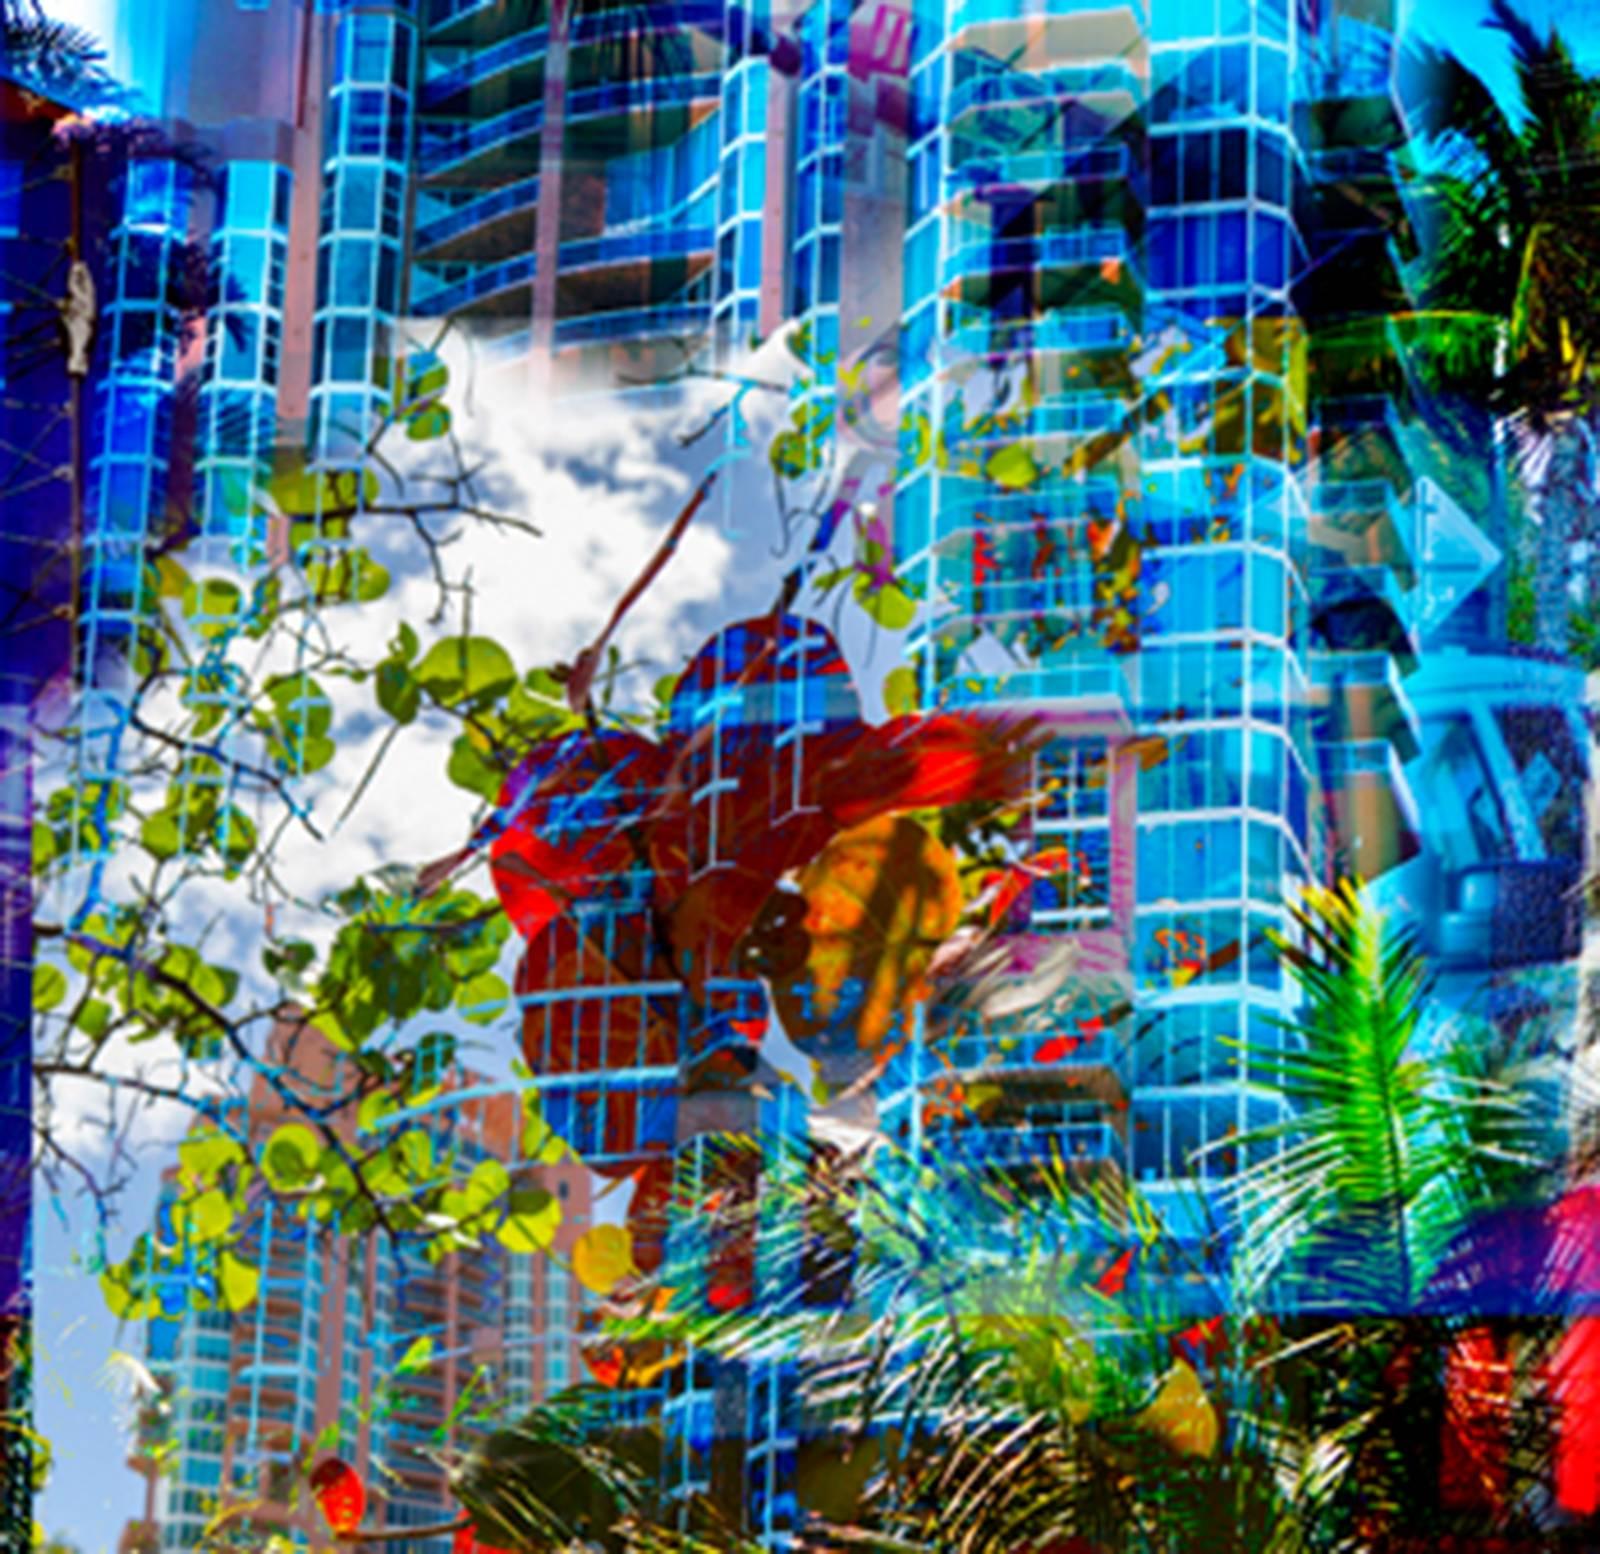 MIAMI AMERICA - The US Flag as a Symbol of Freedom in beautiful Miami - Contemporary Photograph by Jacques Beneich